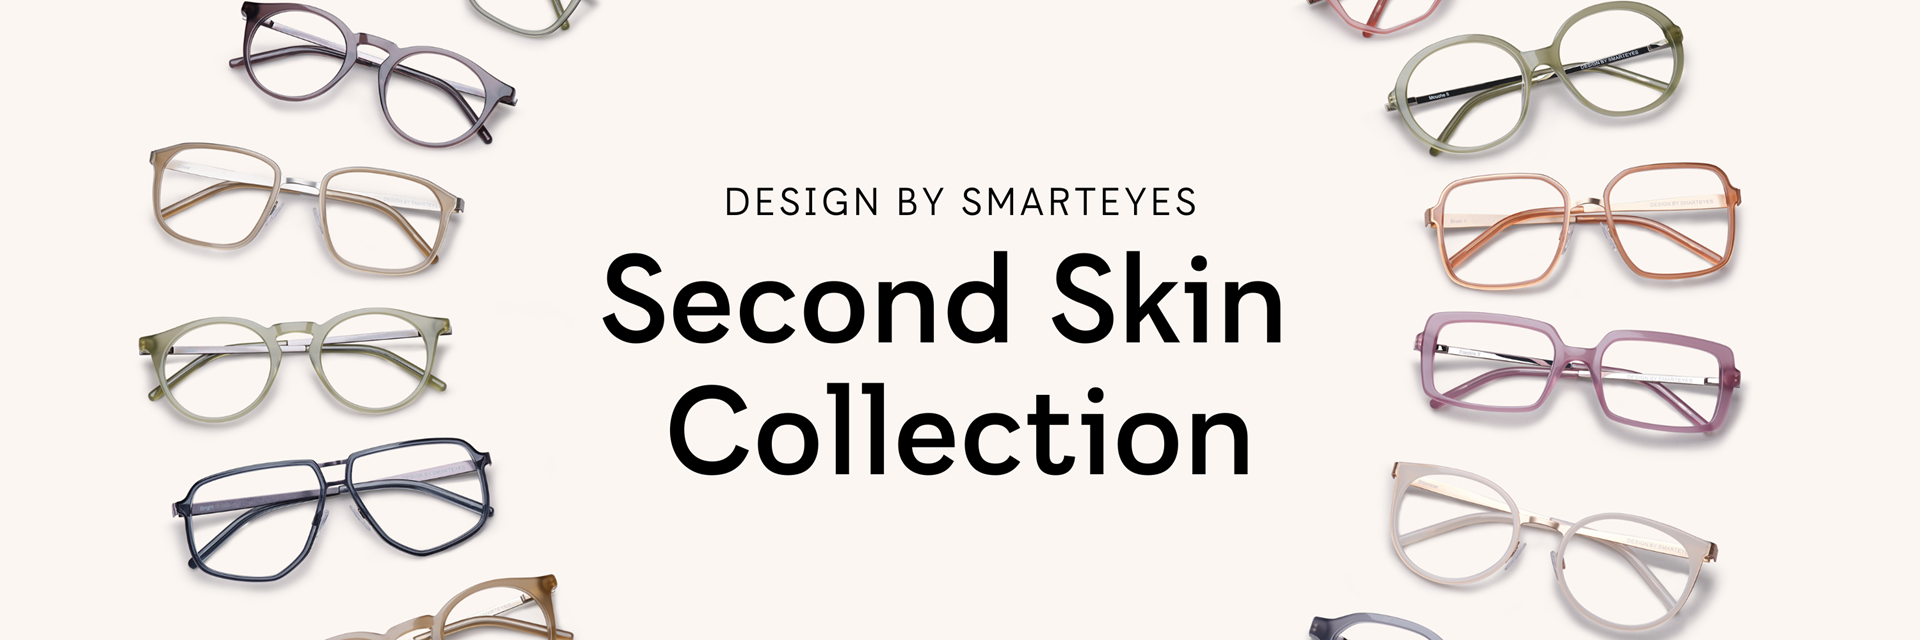 Second Skin Collection